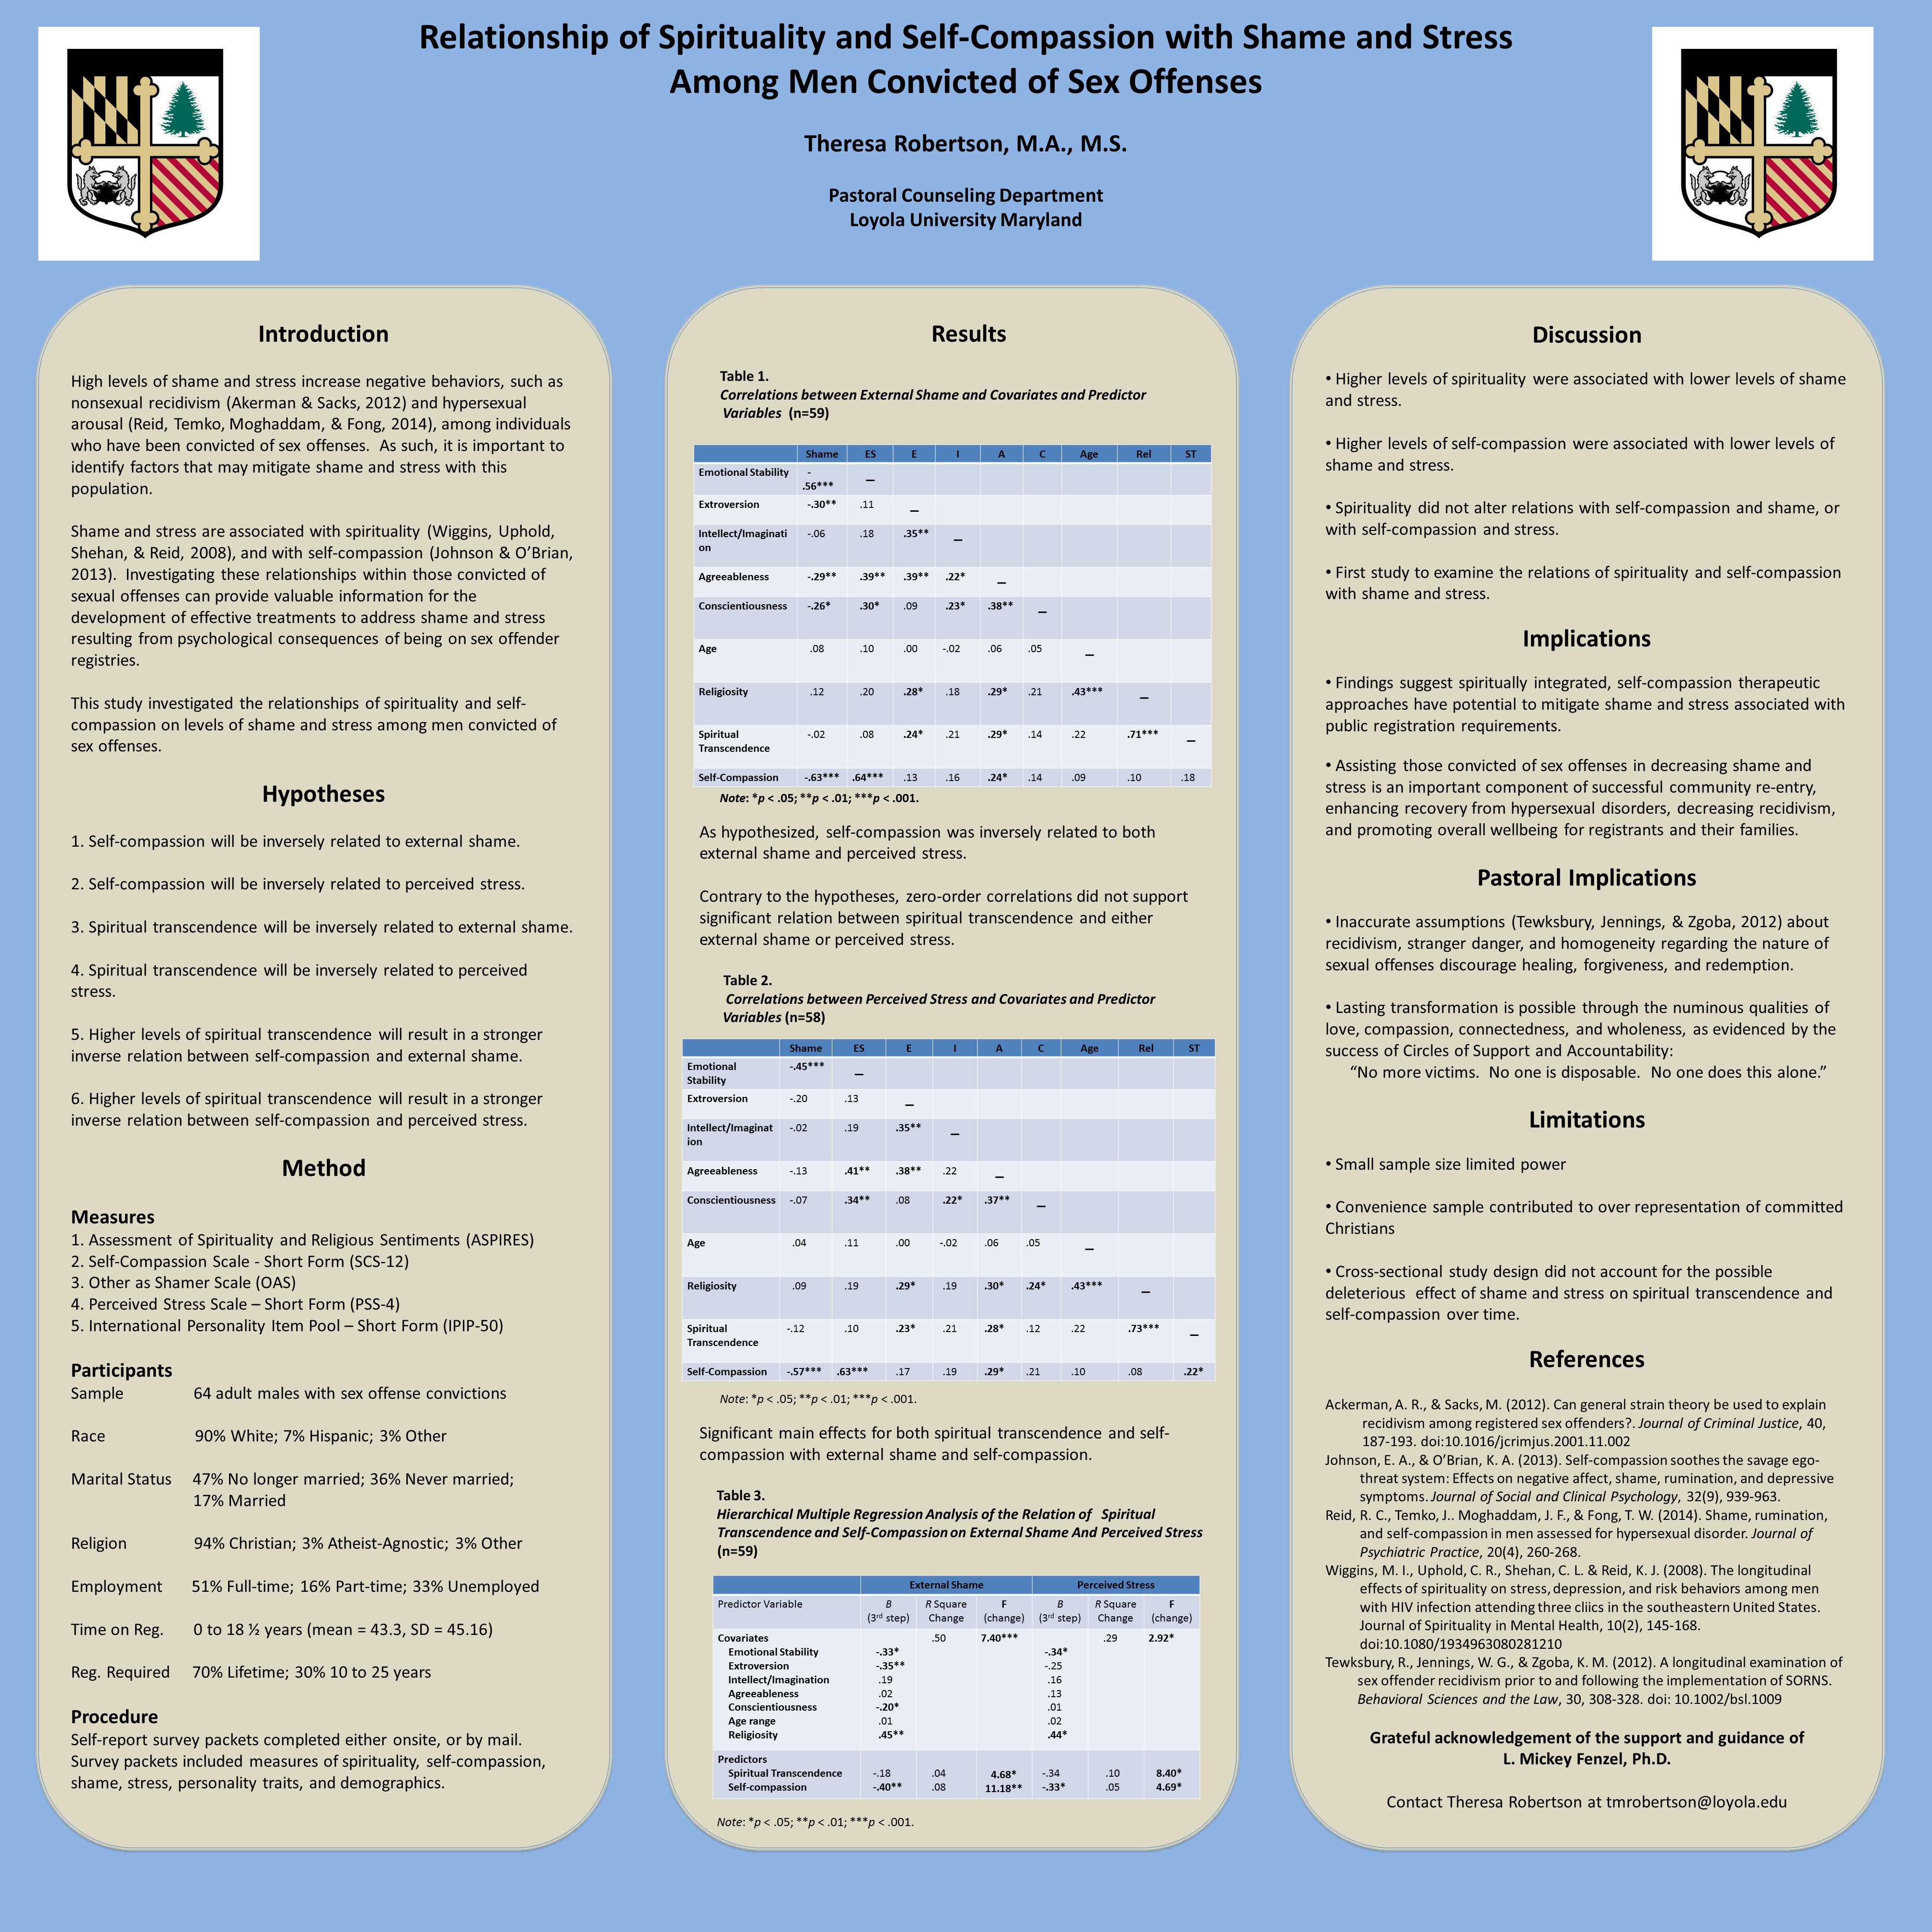 poster image: Relationship of Spirituality and Self-Compassion with Shame and Stress Among Men Convicted of Sex Offenses